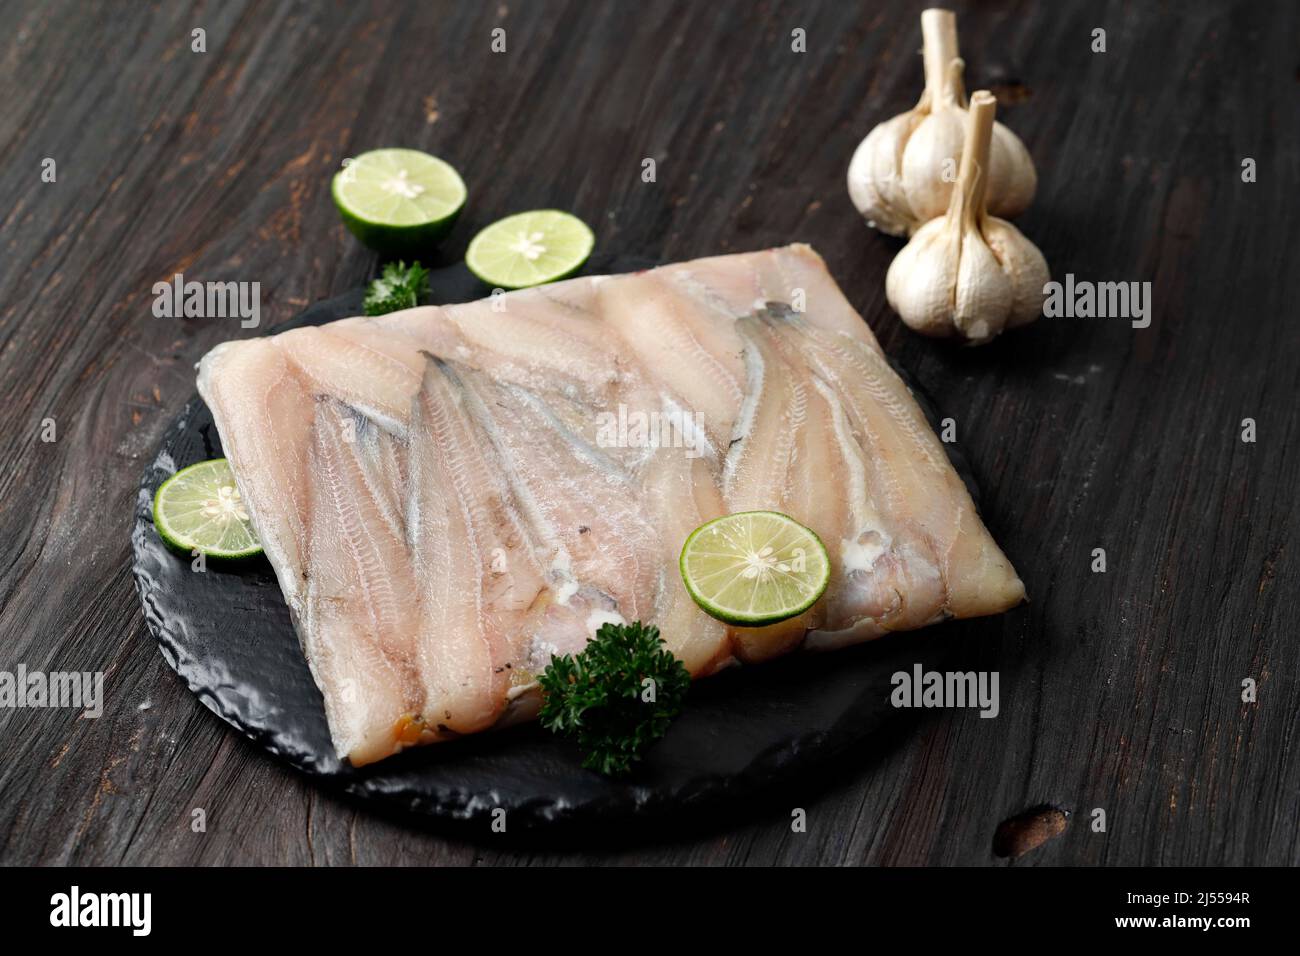 Selected Focus Frozen Catfish Fillet on  Black Wooden Table Stock Photo